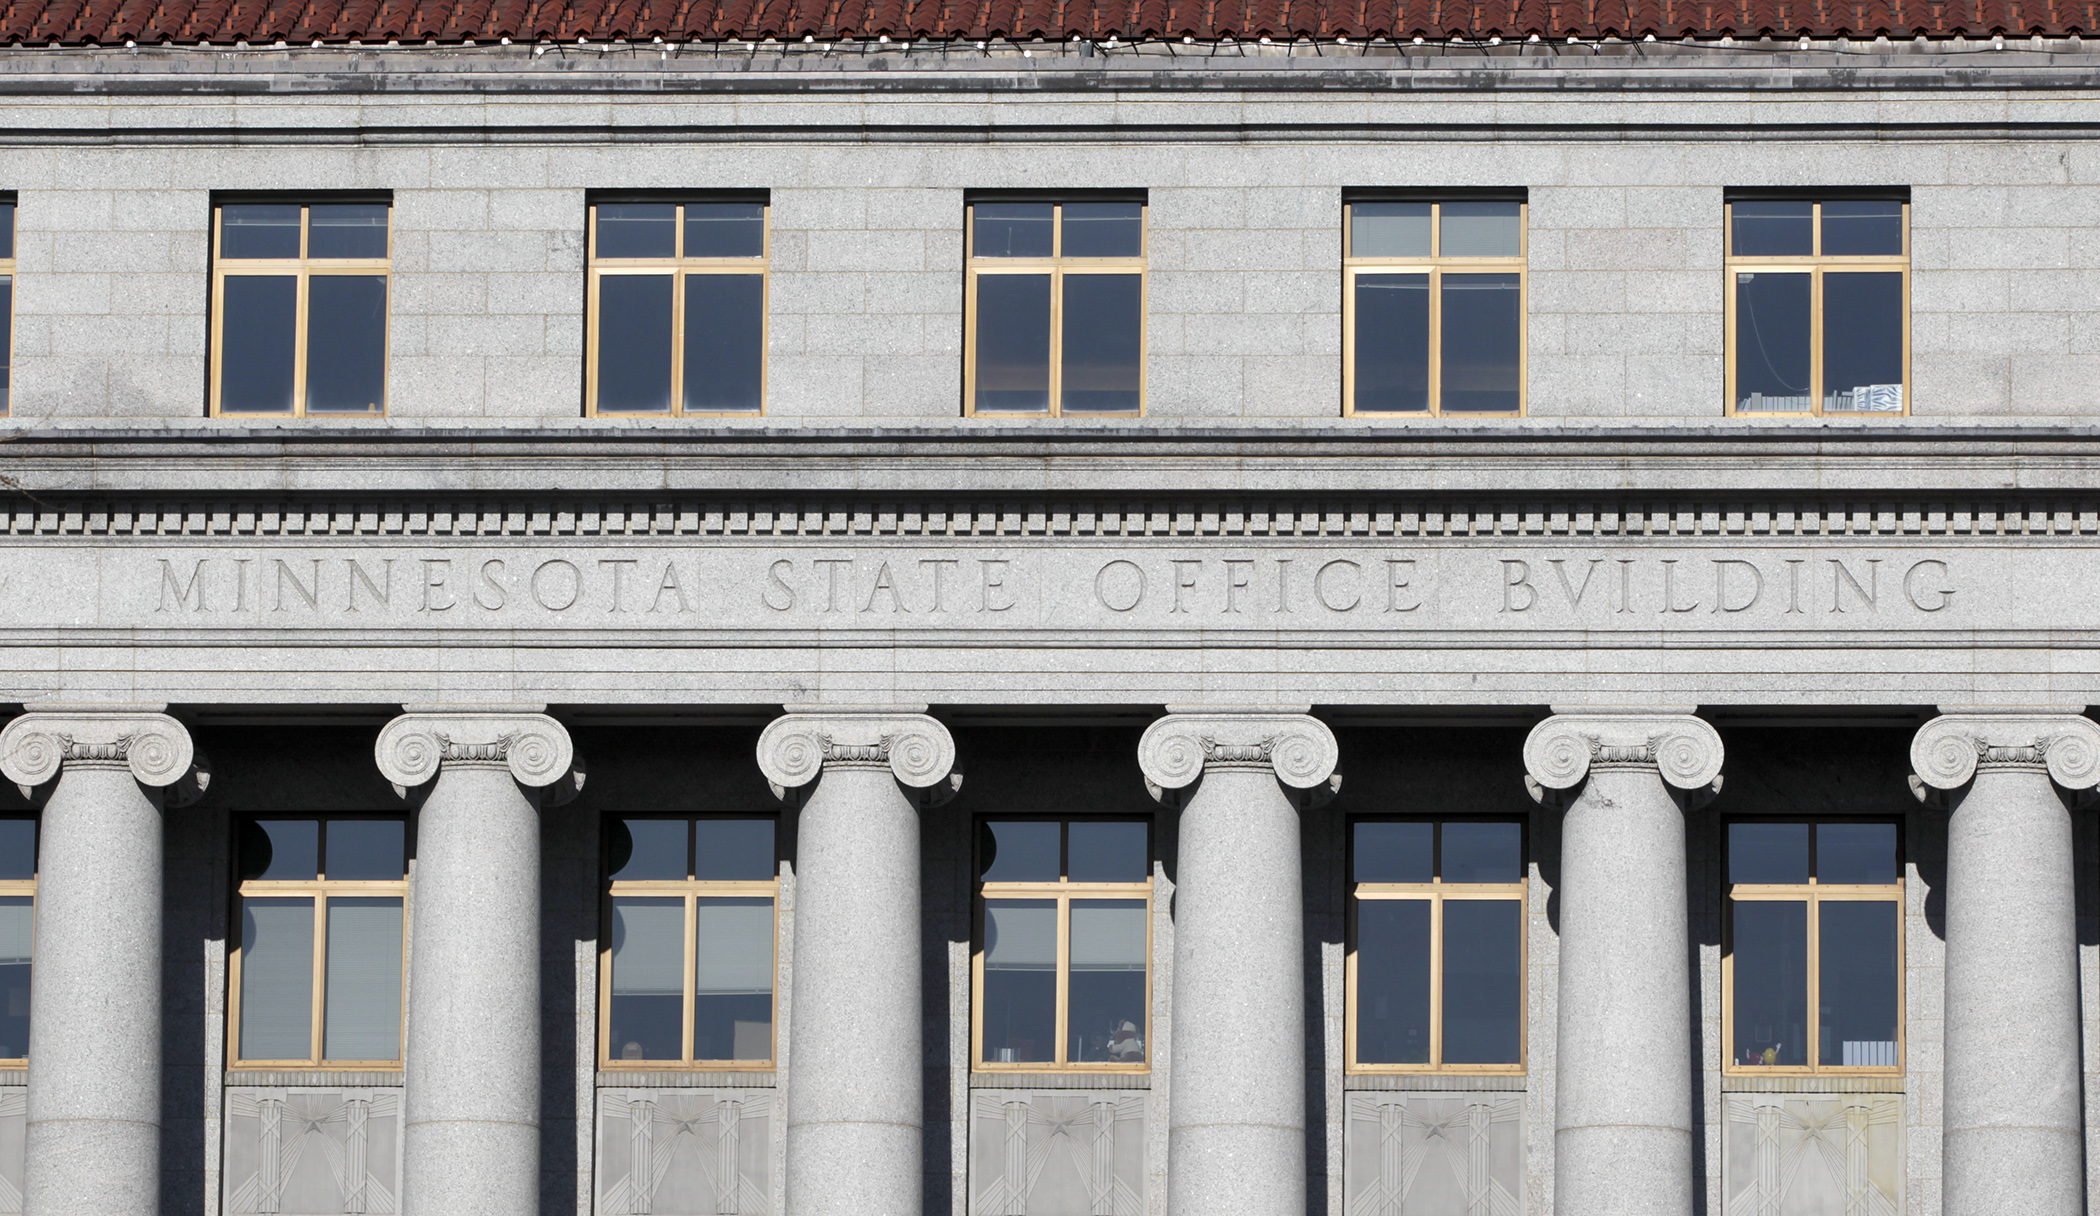 Opened in 1932, the State Office Building needs significant upgrades.